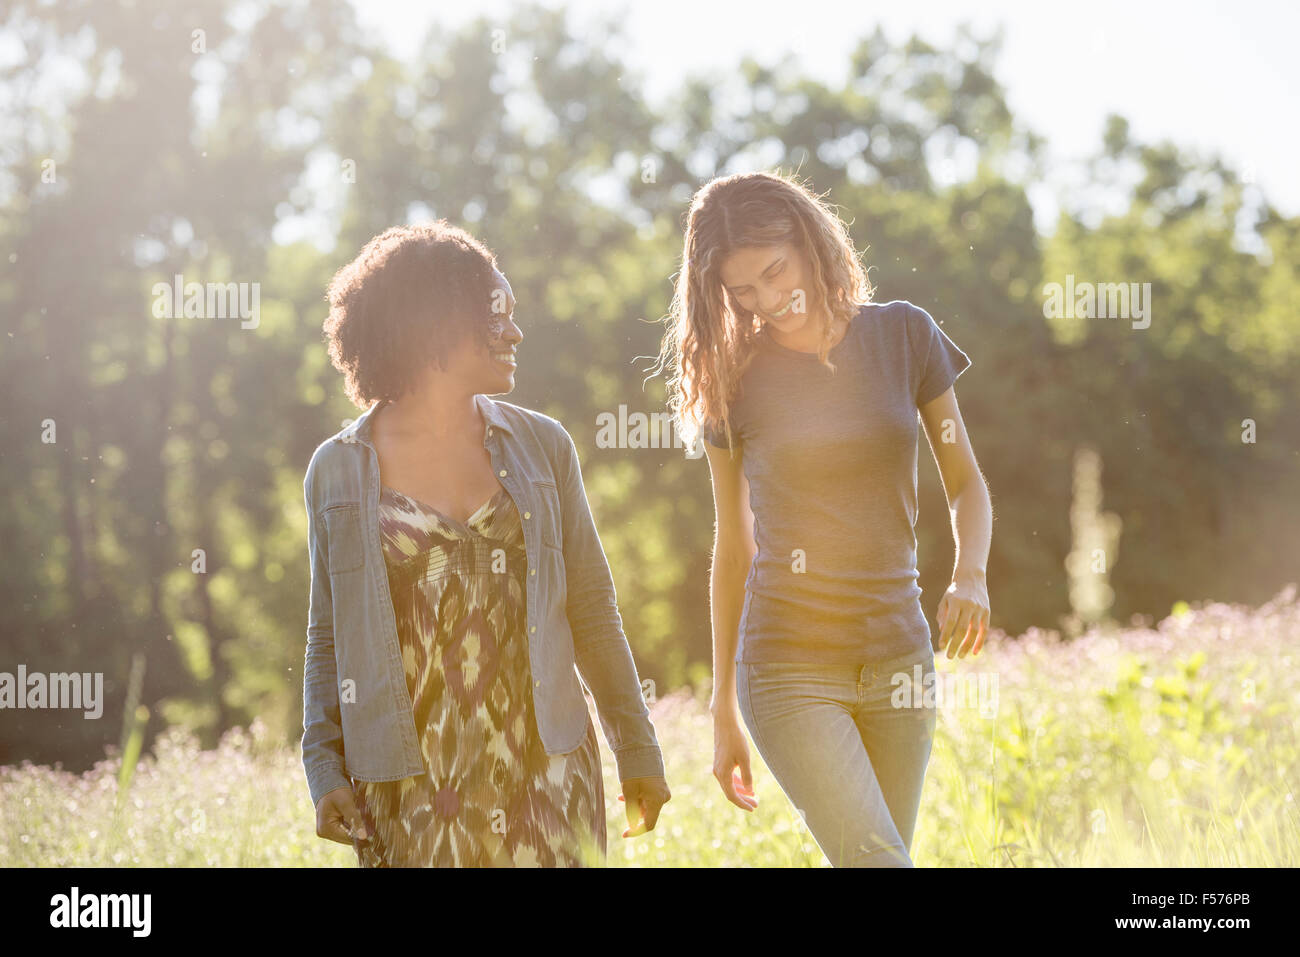 Two women walking through a field talking and laughing. Stock Photo